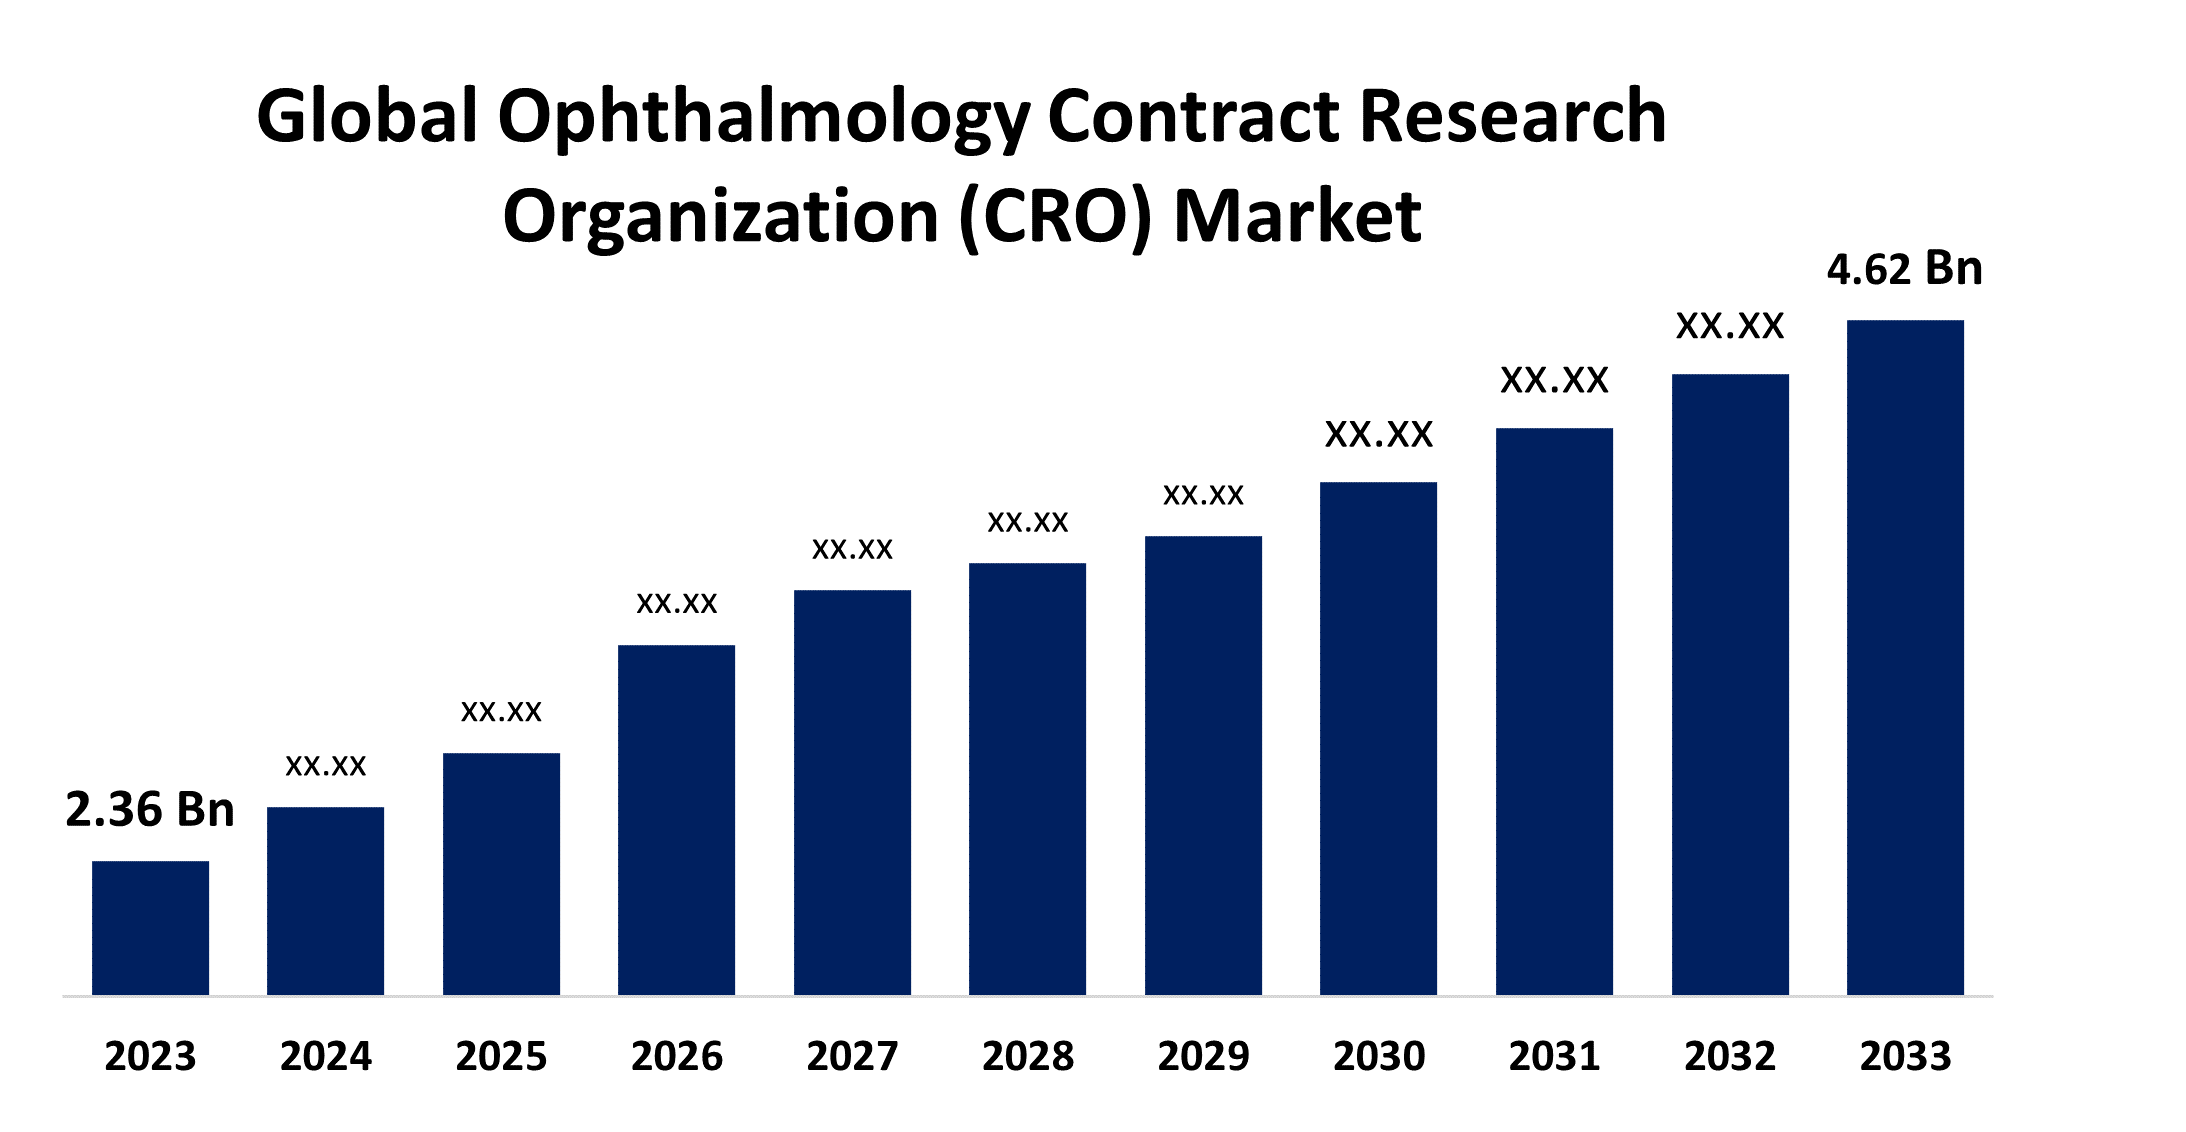 Global Ophthalmology Contract Research Organization (CRO) Market